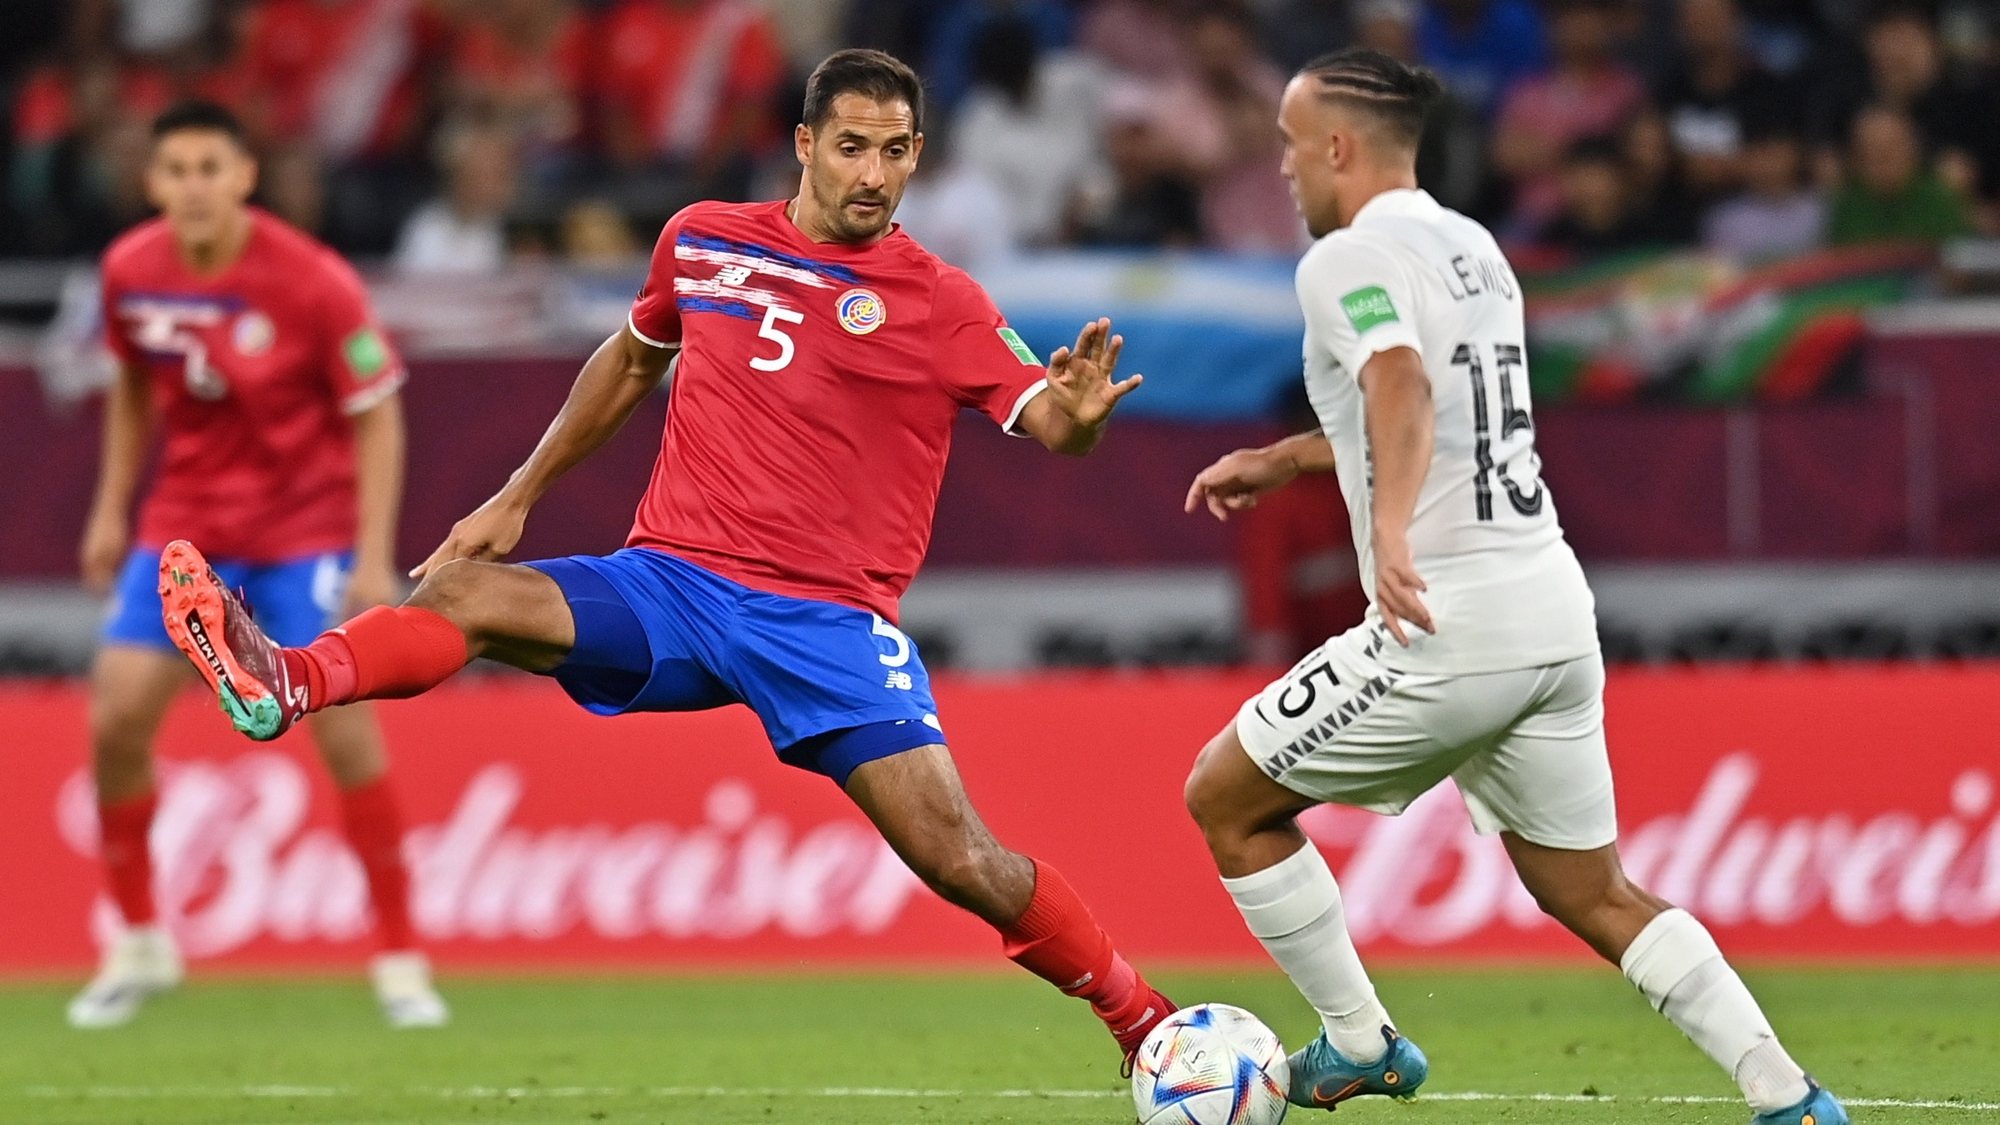 epa10013175 Celso Borges (L) of Costa Rica in action against Clayton Lewis of New Zealand during the FIFA World Cup 2022 Intercontinental playoff qualifying soccer match between Costa Rica and New Zealand in Al Rayyan, Qatar, 14 June 2022.  EPA/Noushad Thekkayil